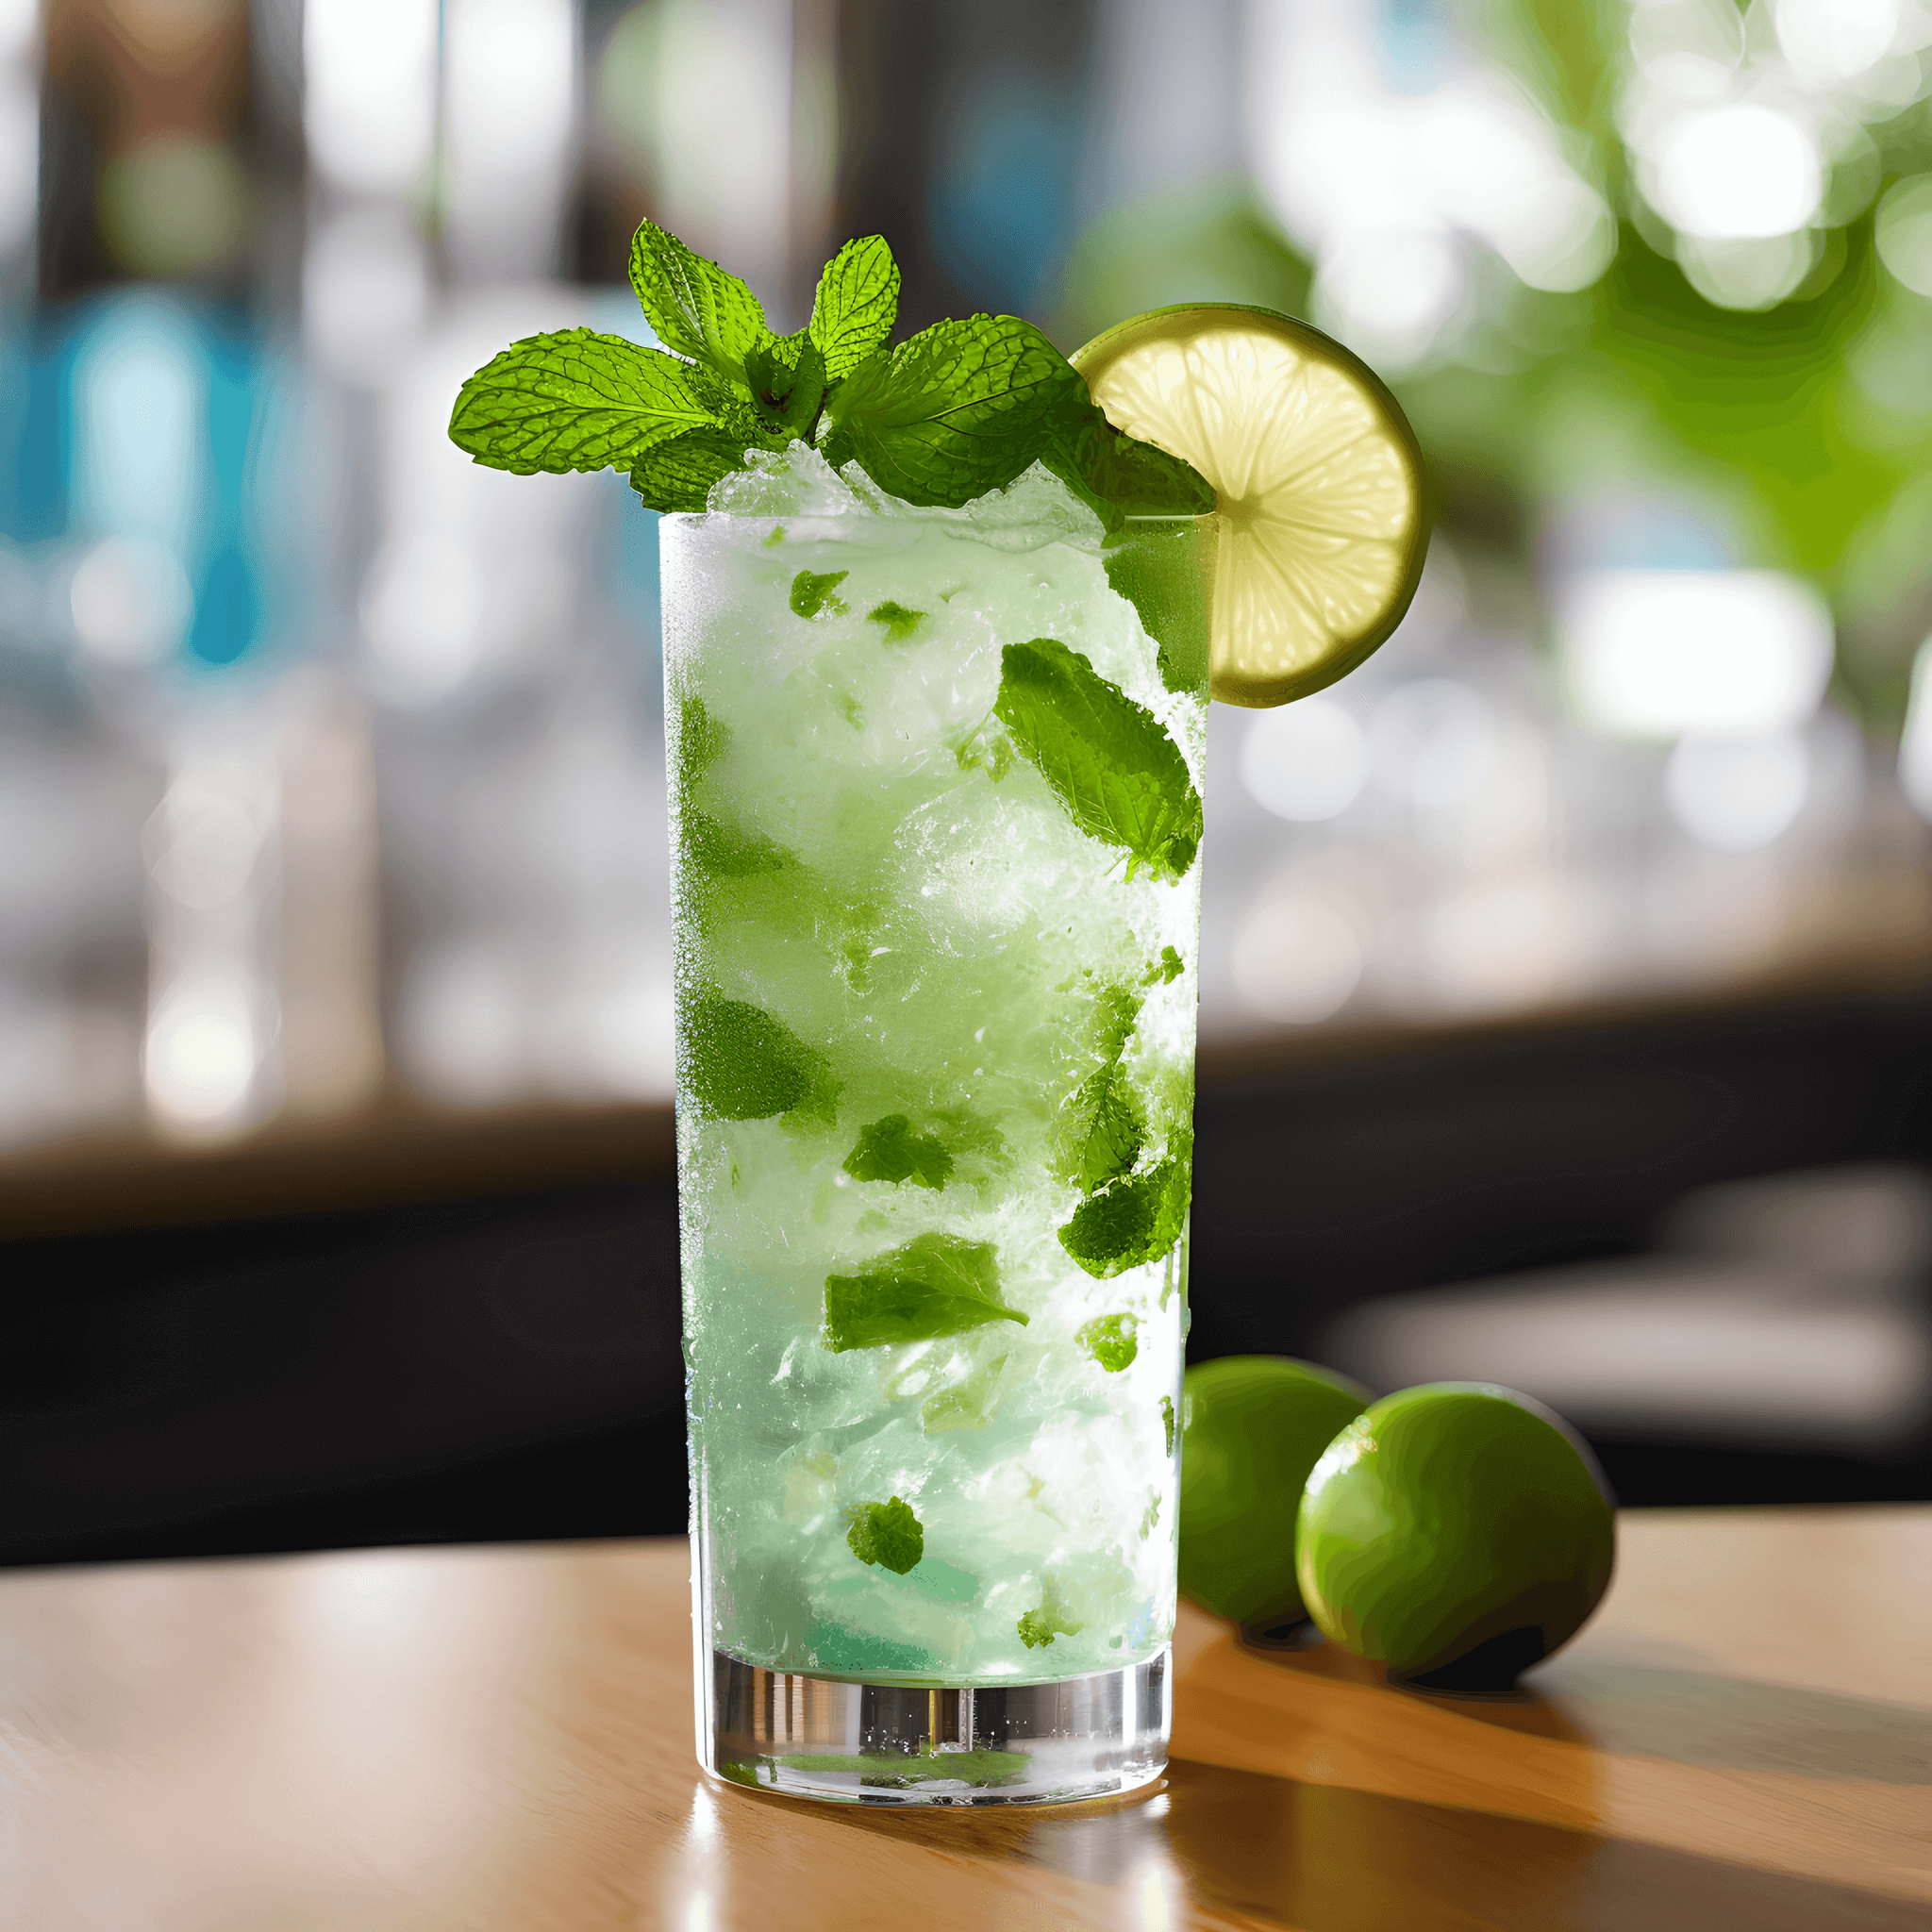 Mojito Cocktail Recipe - The Mojito is a refreshing, sweet, and slightly sour cocktail with a hint of mint and a subtle rum kick. It is a well-balanced drink that is both invigorating and easy to sip.